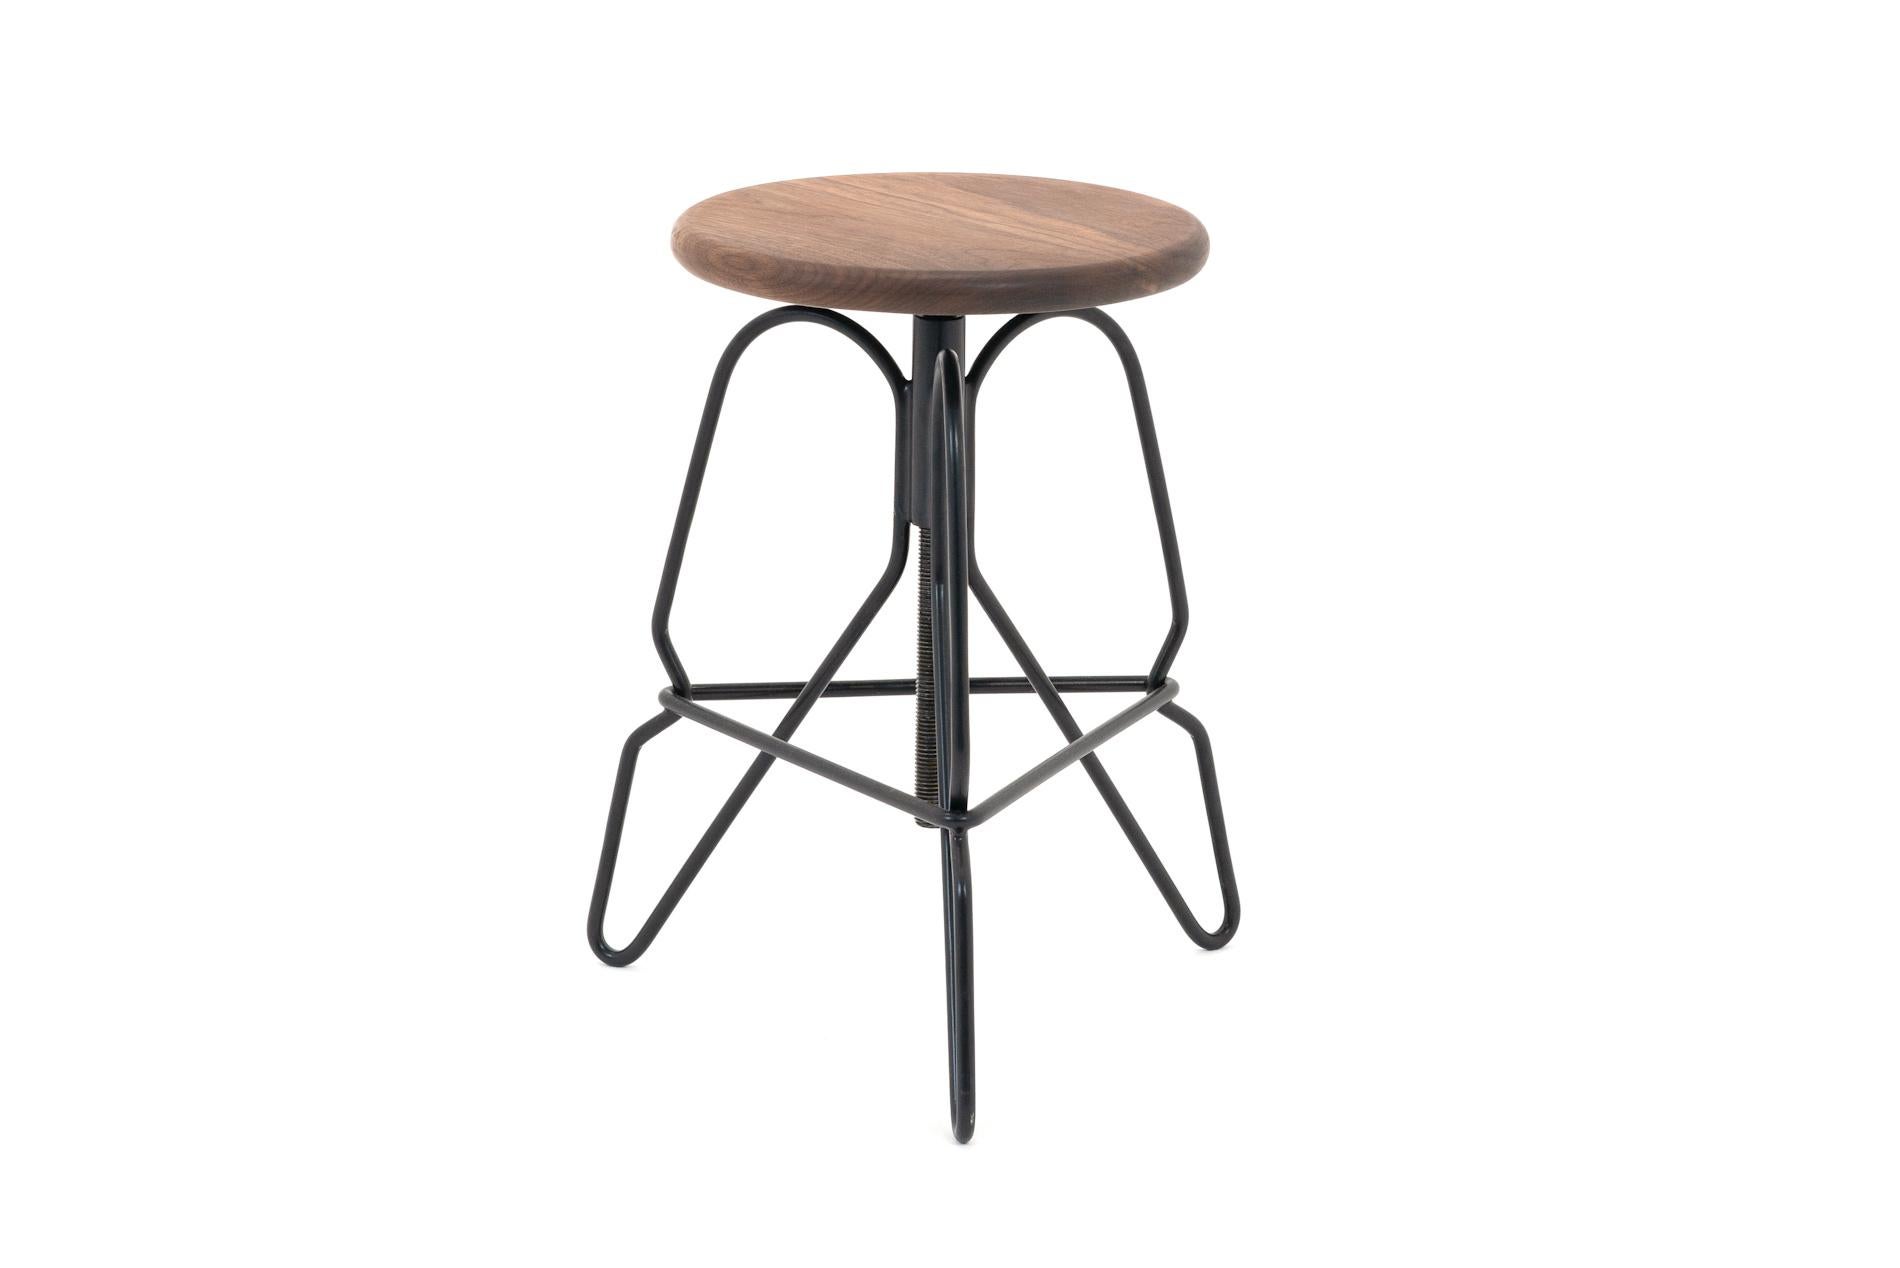 The rig stool is a minimal solid steel stool featuring an adjustable solid wood seat on a threaded rod. The legs are tied together with a triangular footrest.

This handcrafted piece is hand-oiled using our in-house oils and techniques and